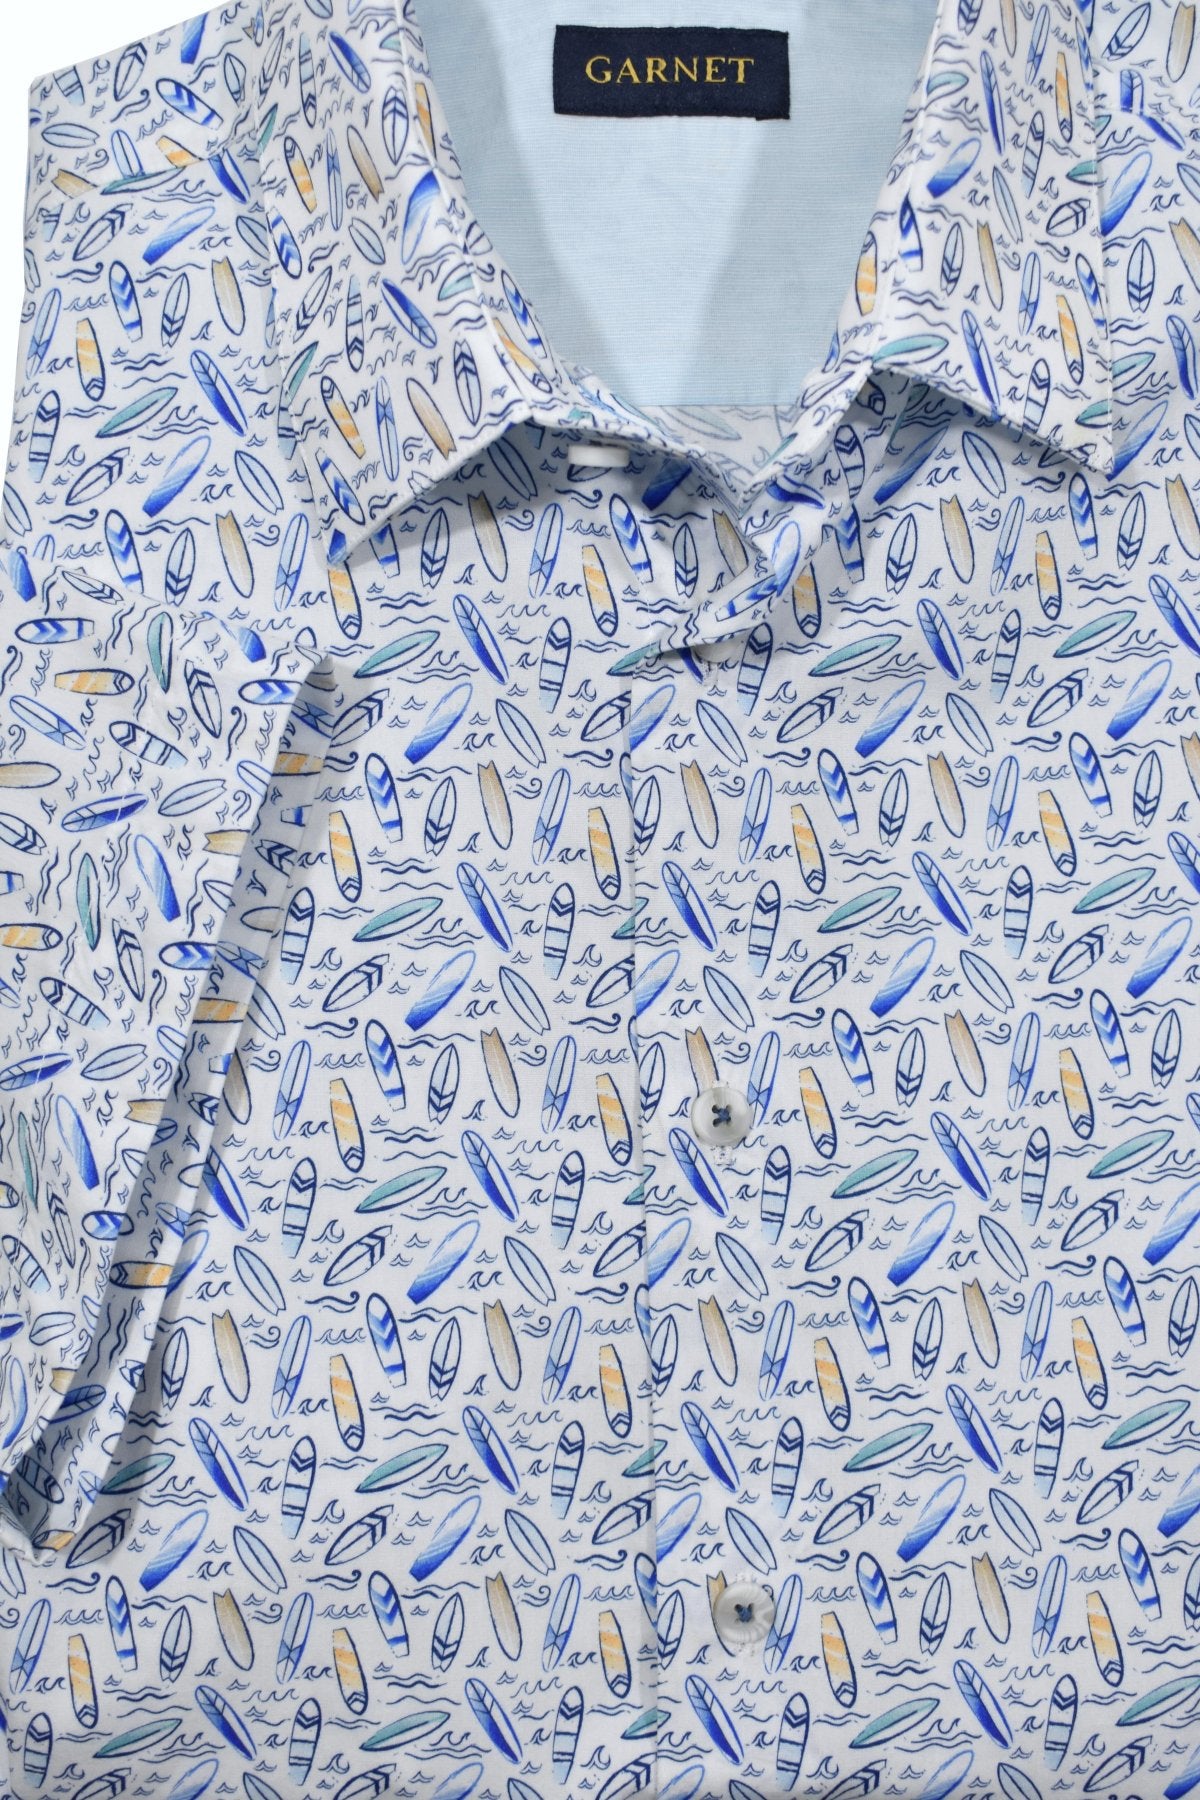 "Ride the wave of style with our ZA10861 Catchin' Waves Shirt! Made from soft cotton sateen, this conversational shirt features a playful print of small surfboards and waves in rich ocean colors. With a tailored collar, trim fabric, and short sleeves, you'll be ready to hit the beach in style. 